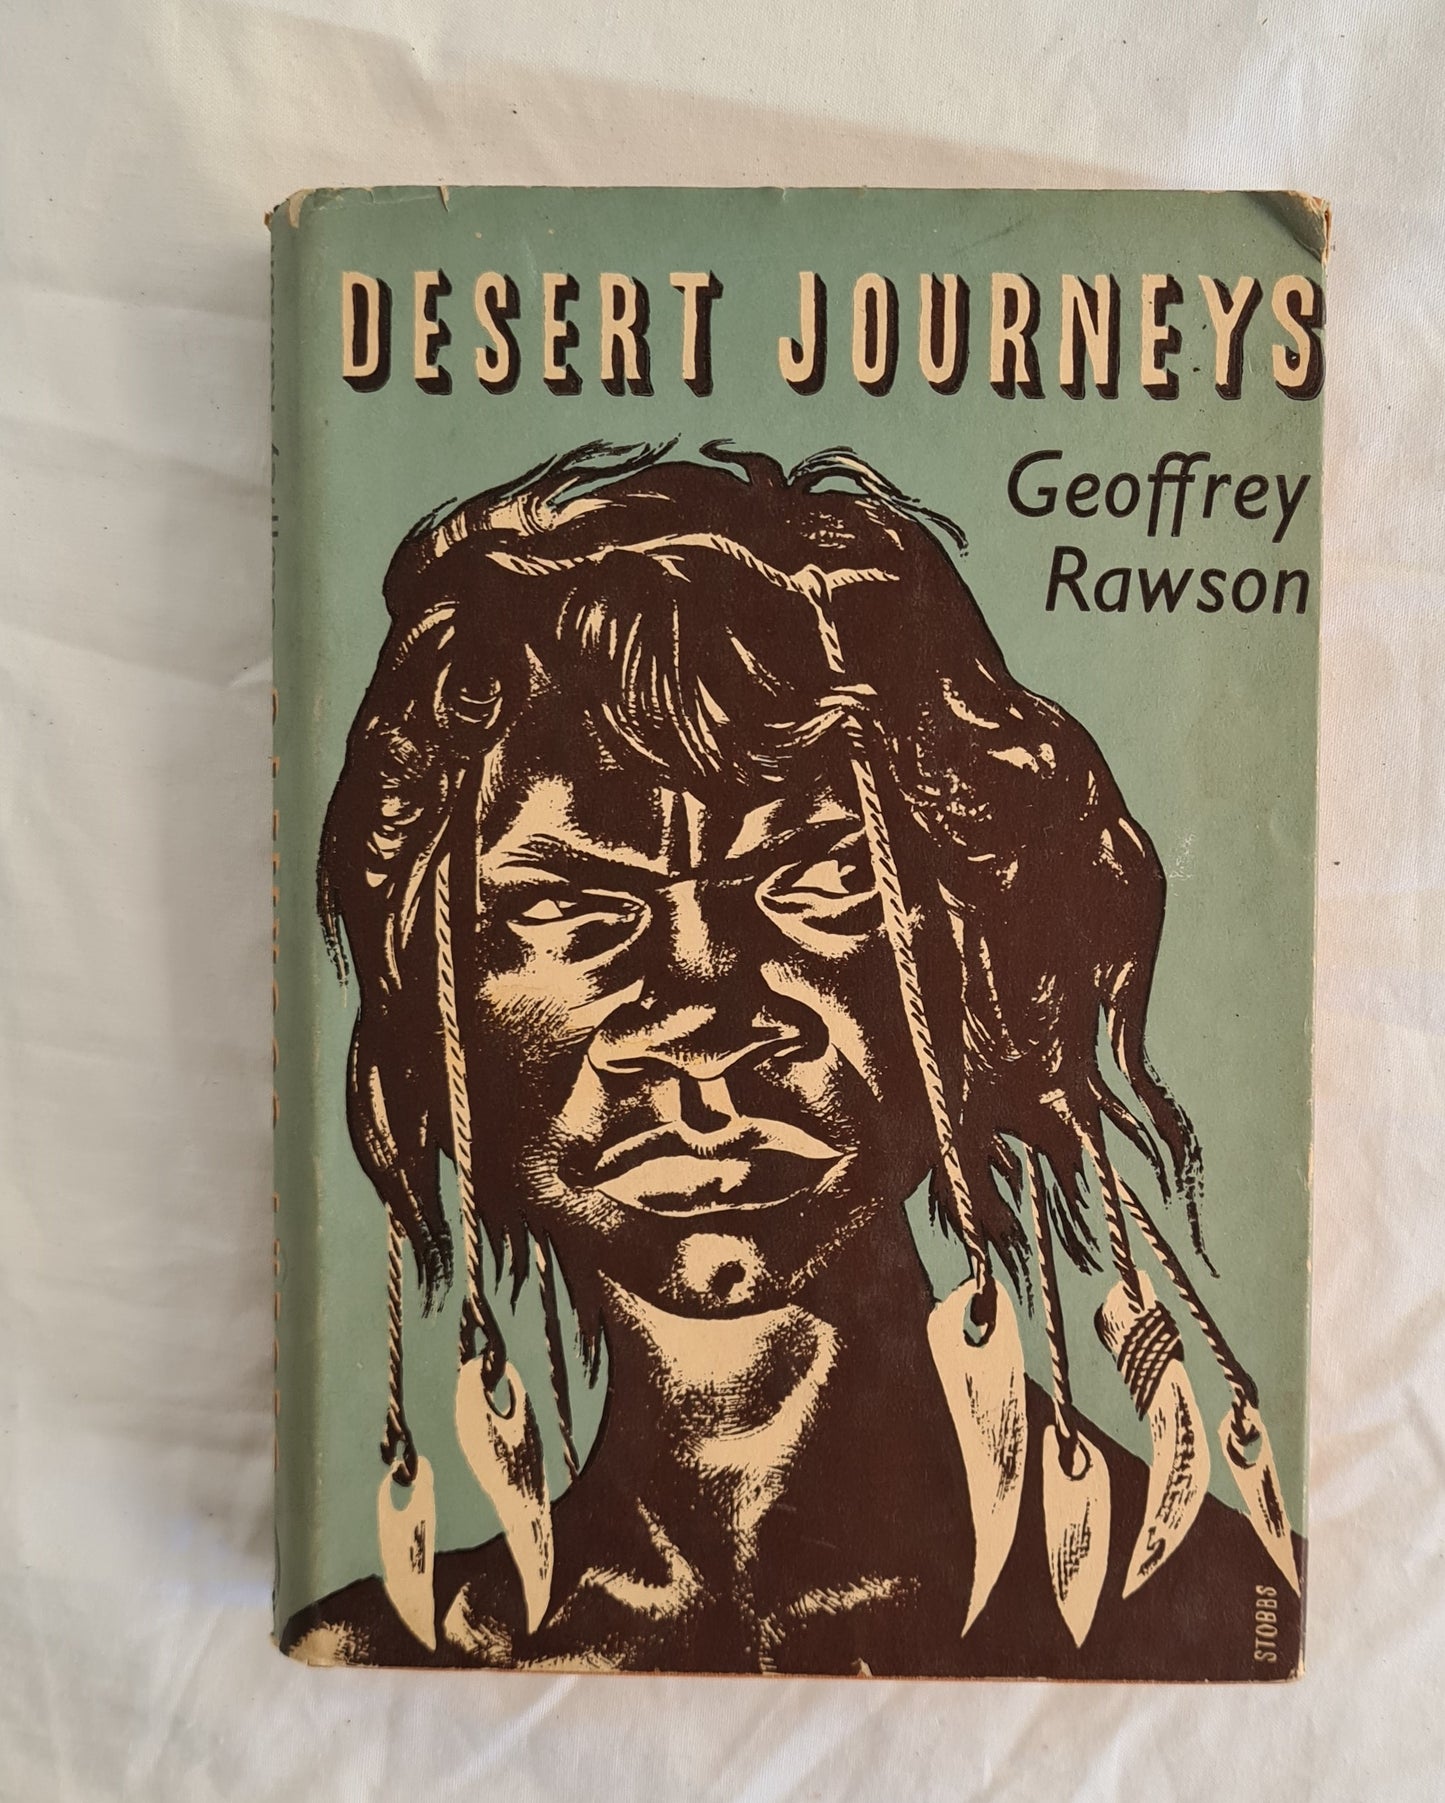 Desert Journeys  An Account of the Arduous Exploration of the Interior of the Continent of Australia by Rival Expeditions in 1873-4  by Geoffrey Rawson